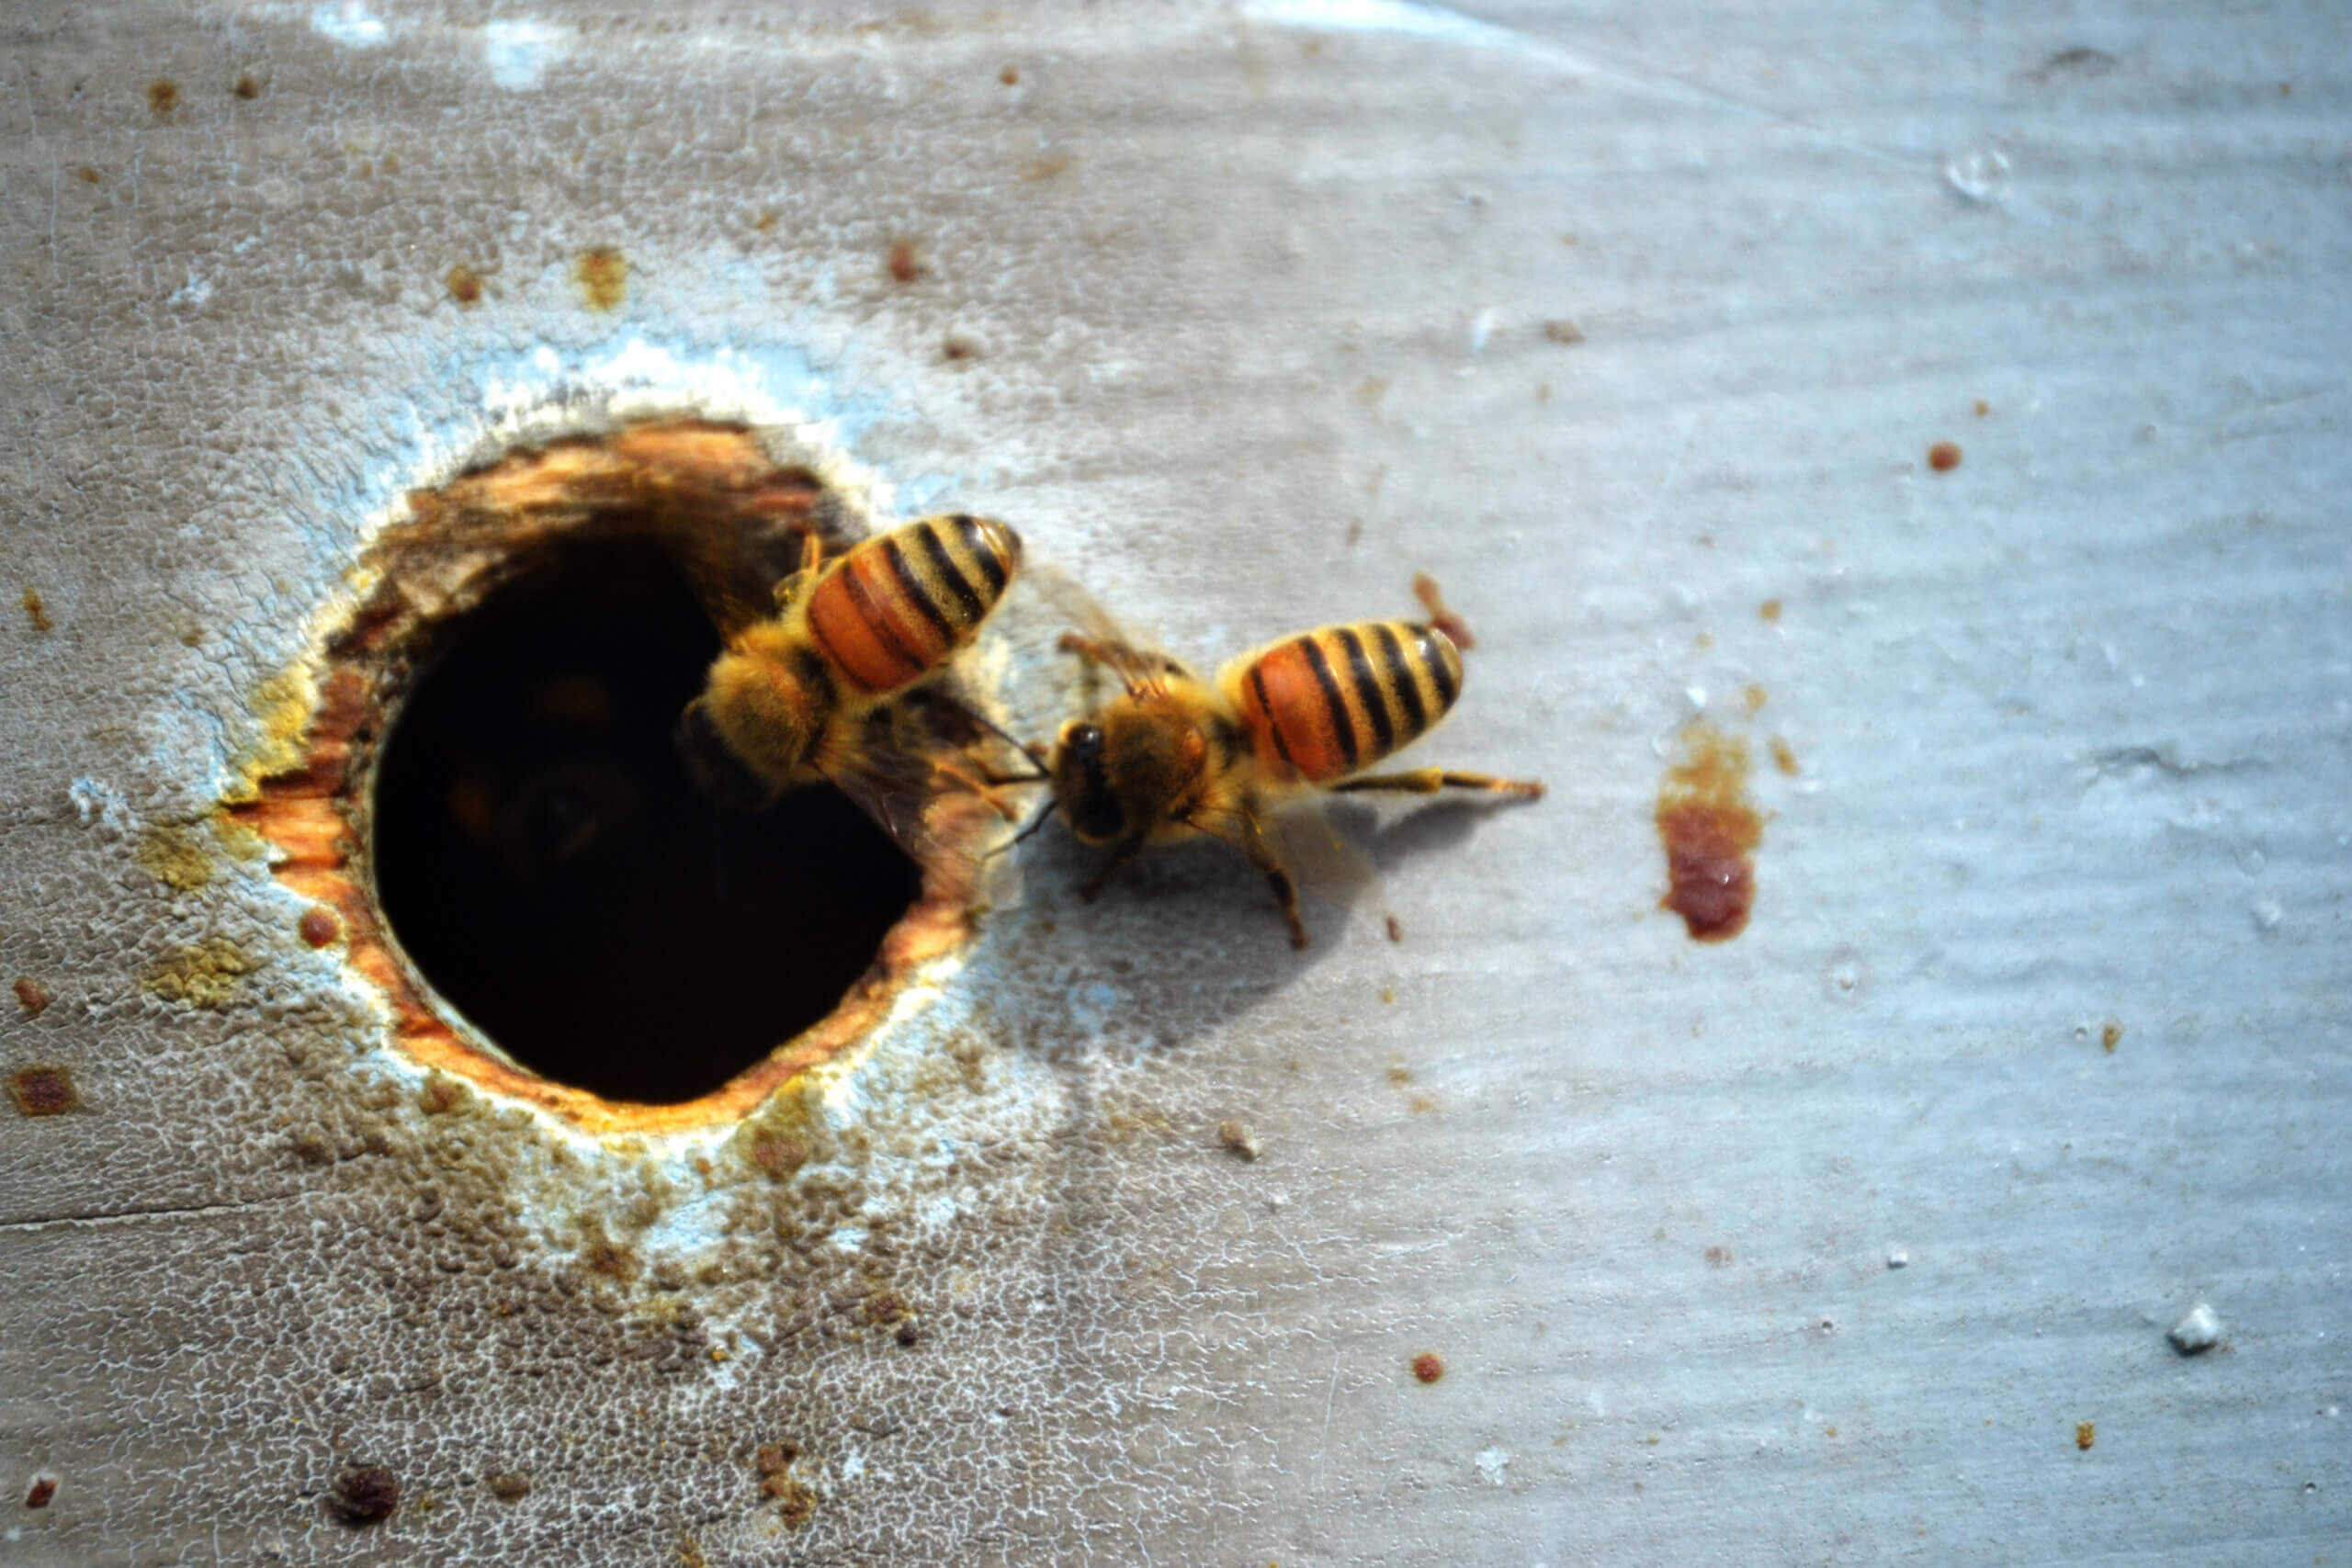 Bees entering a beehive hole.